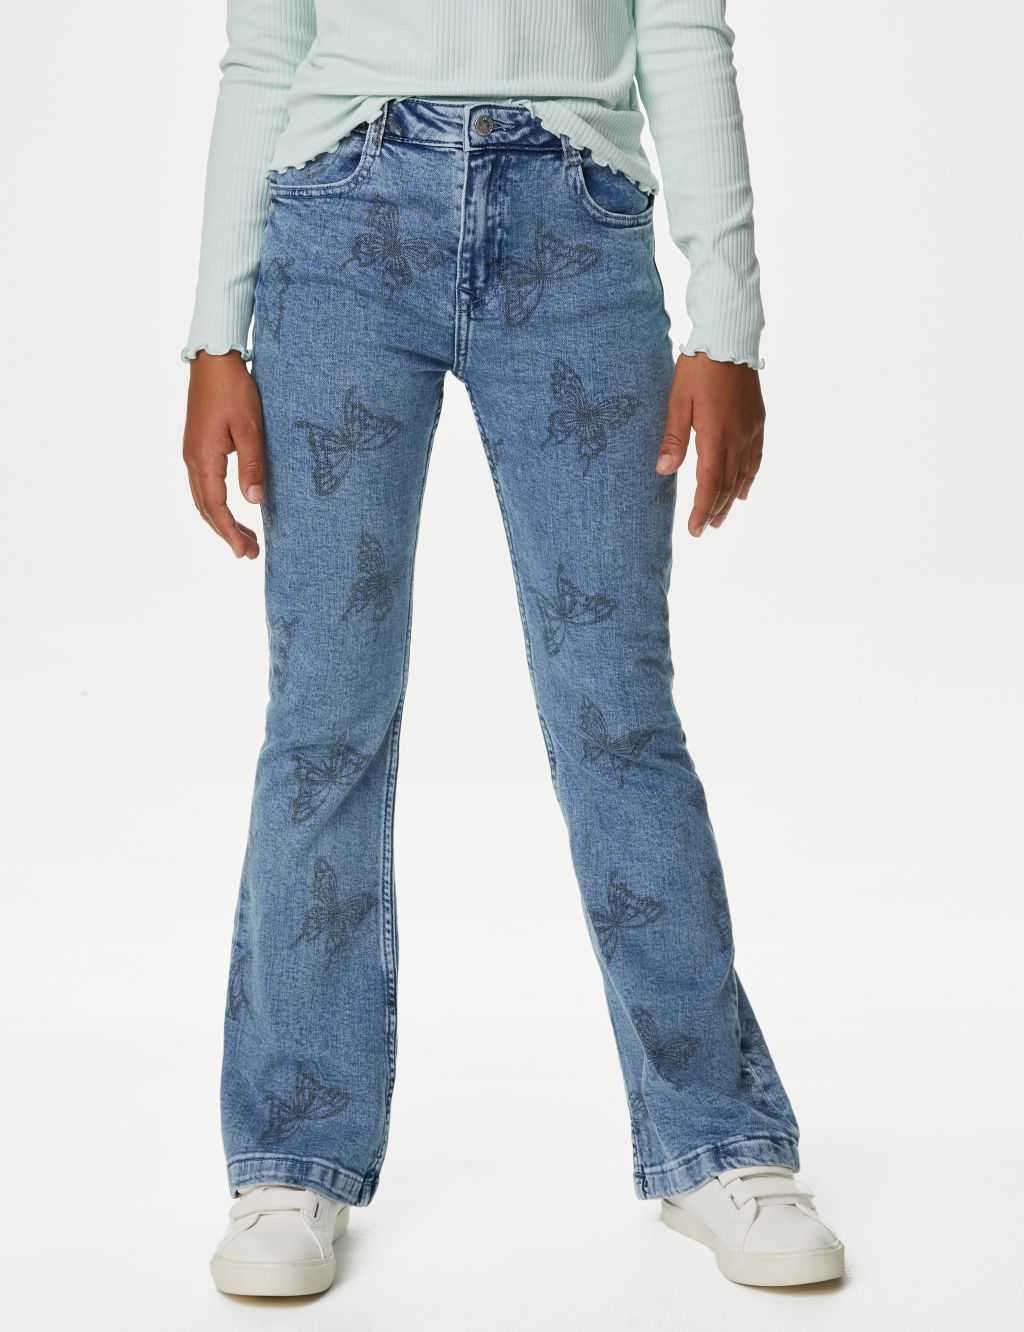 Denim Flared Butterfly Jeans (6-16 Yrs) image 4